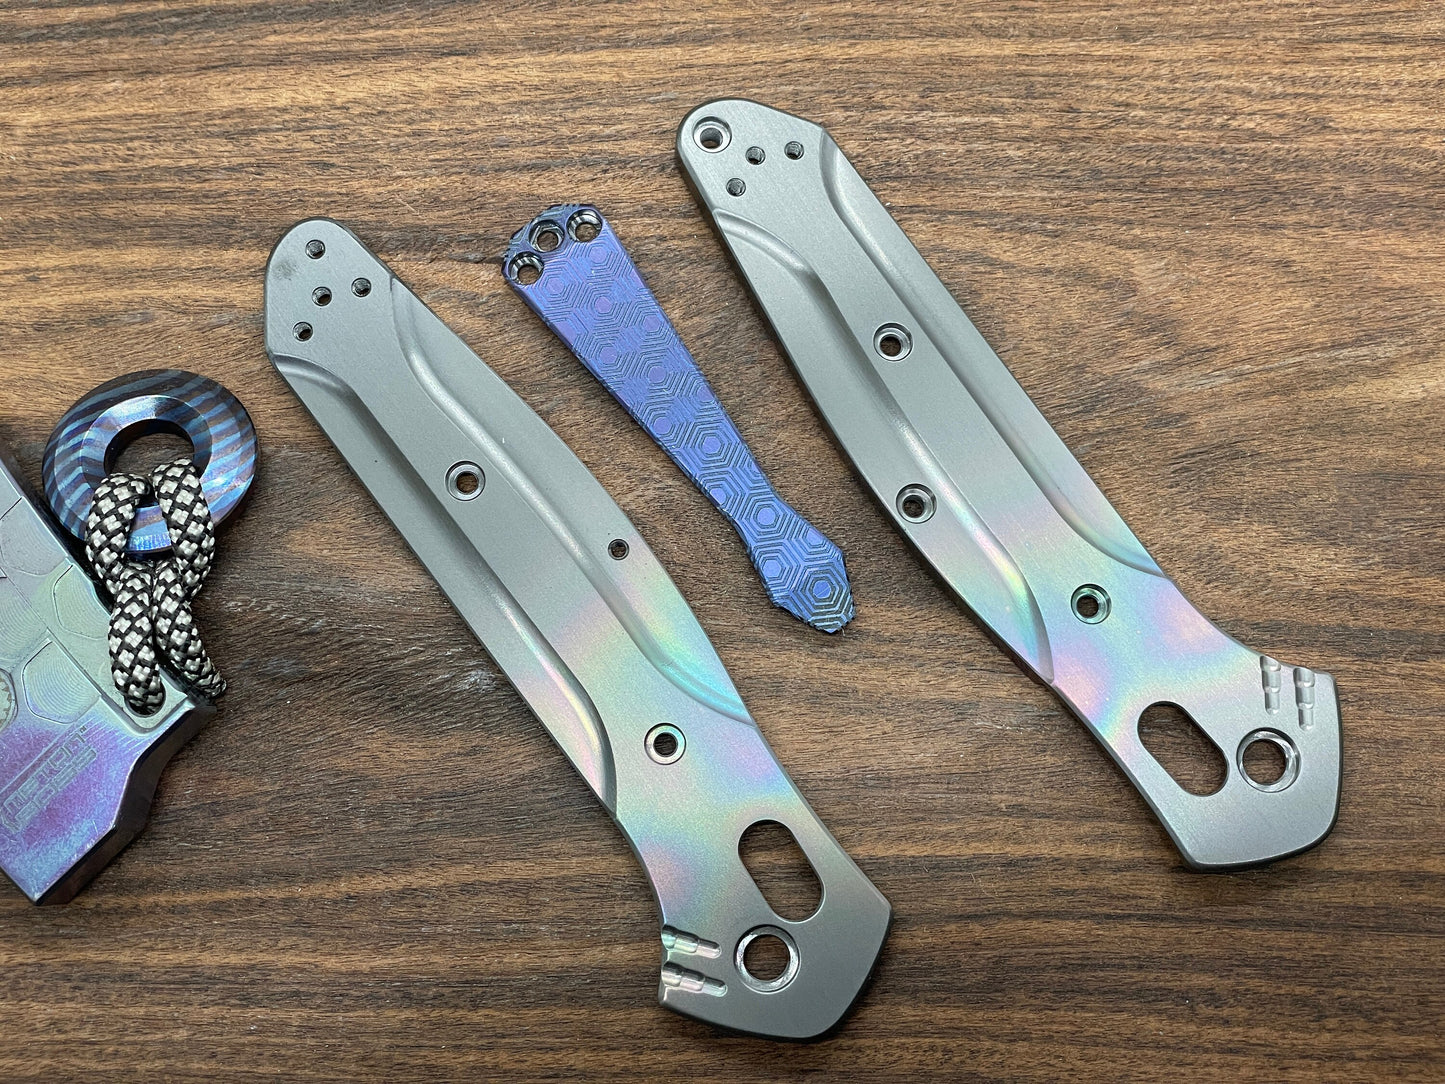 Blue ano HONEYCOMB engraved Dmd Titanium CLIP for most Benchmade models